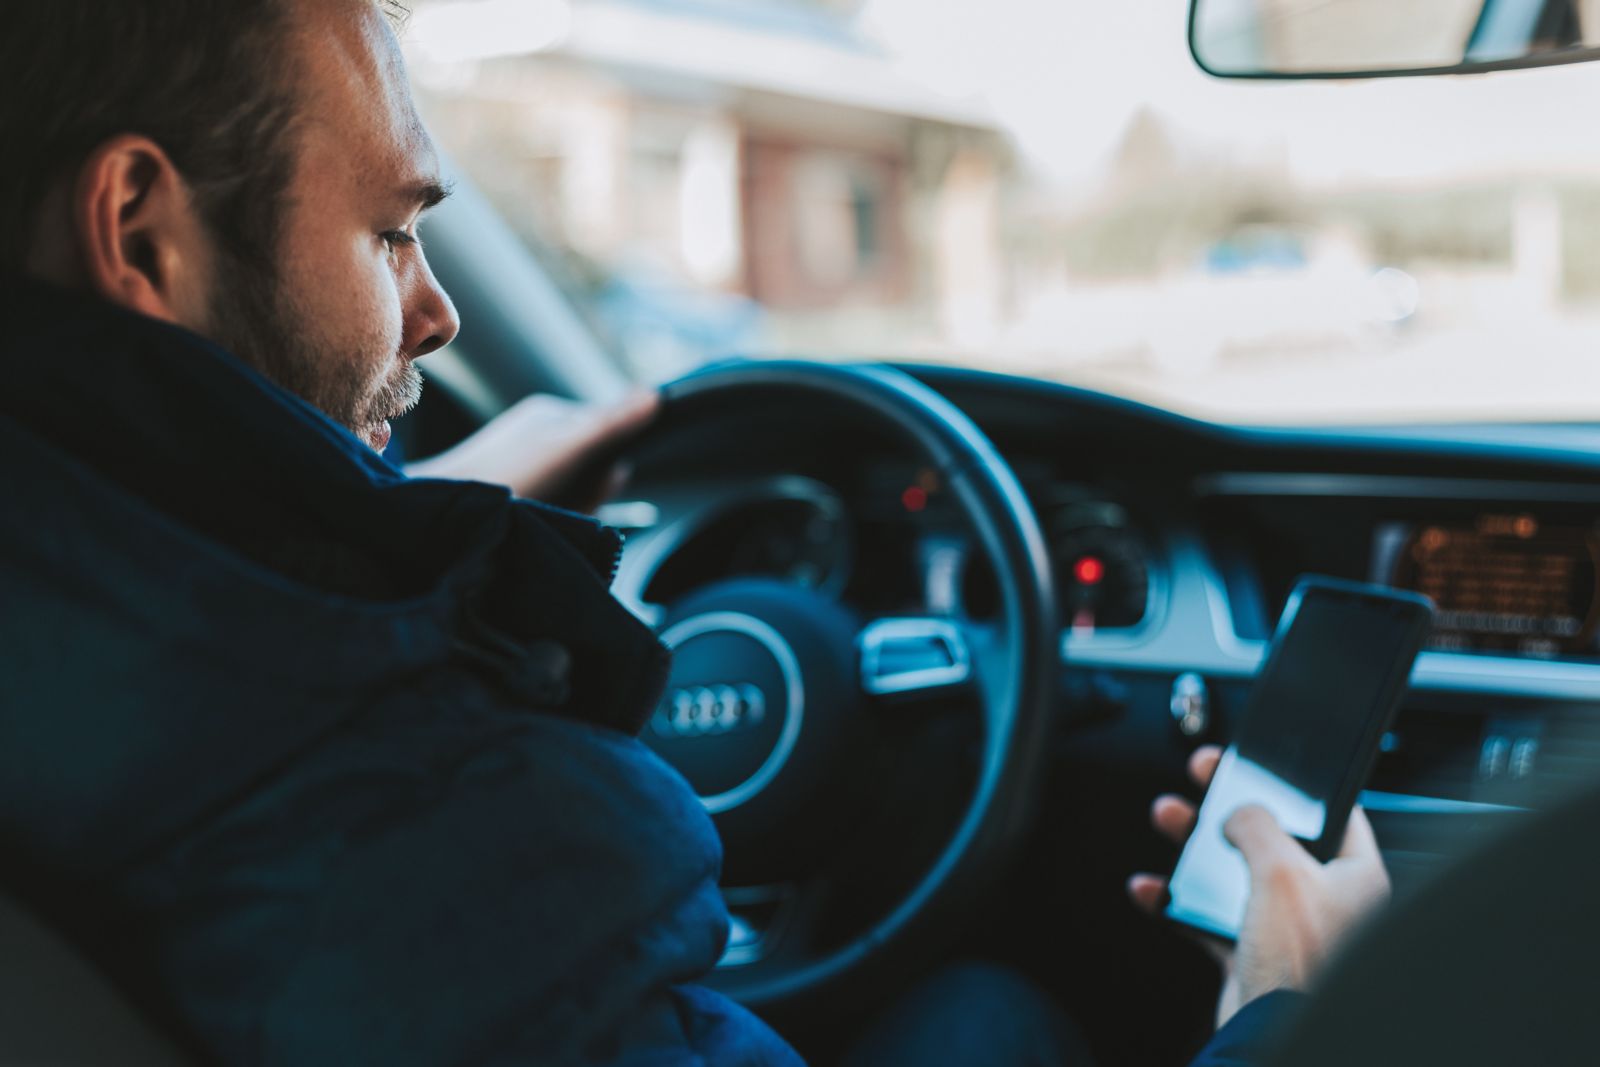 Florida’s New Texting and Driving Law: Good Intentions May Lead to Serious Consequences, says Fort Lauderdale Criminal Defense Attorney